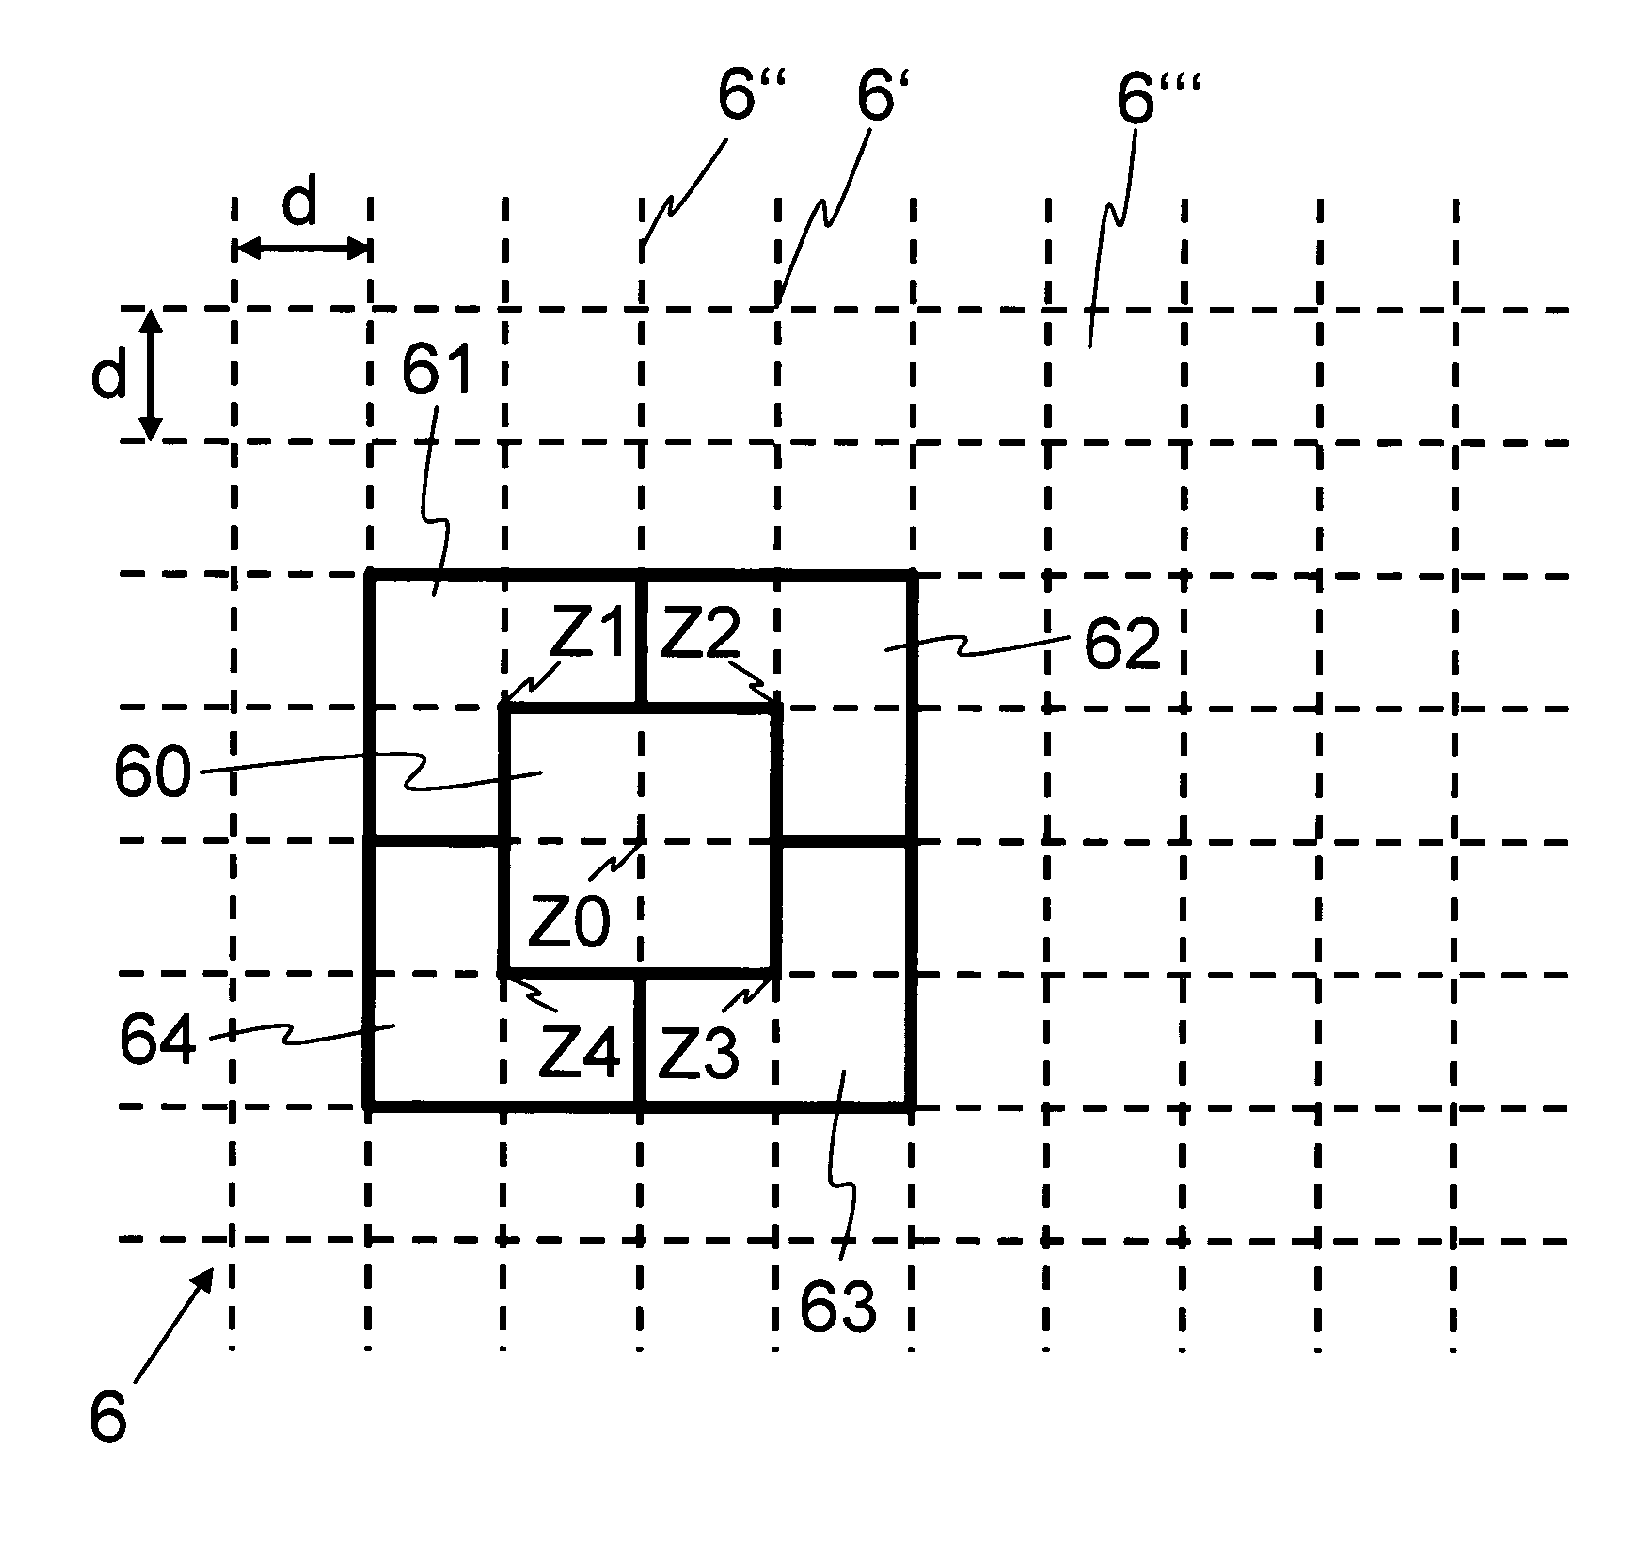 Method and system for generating a pictorial reference database using geographical information